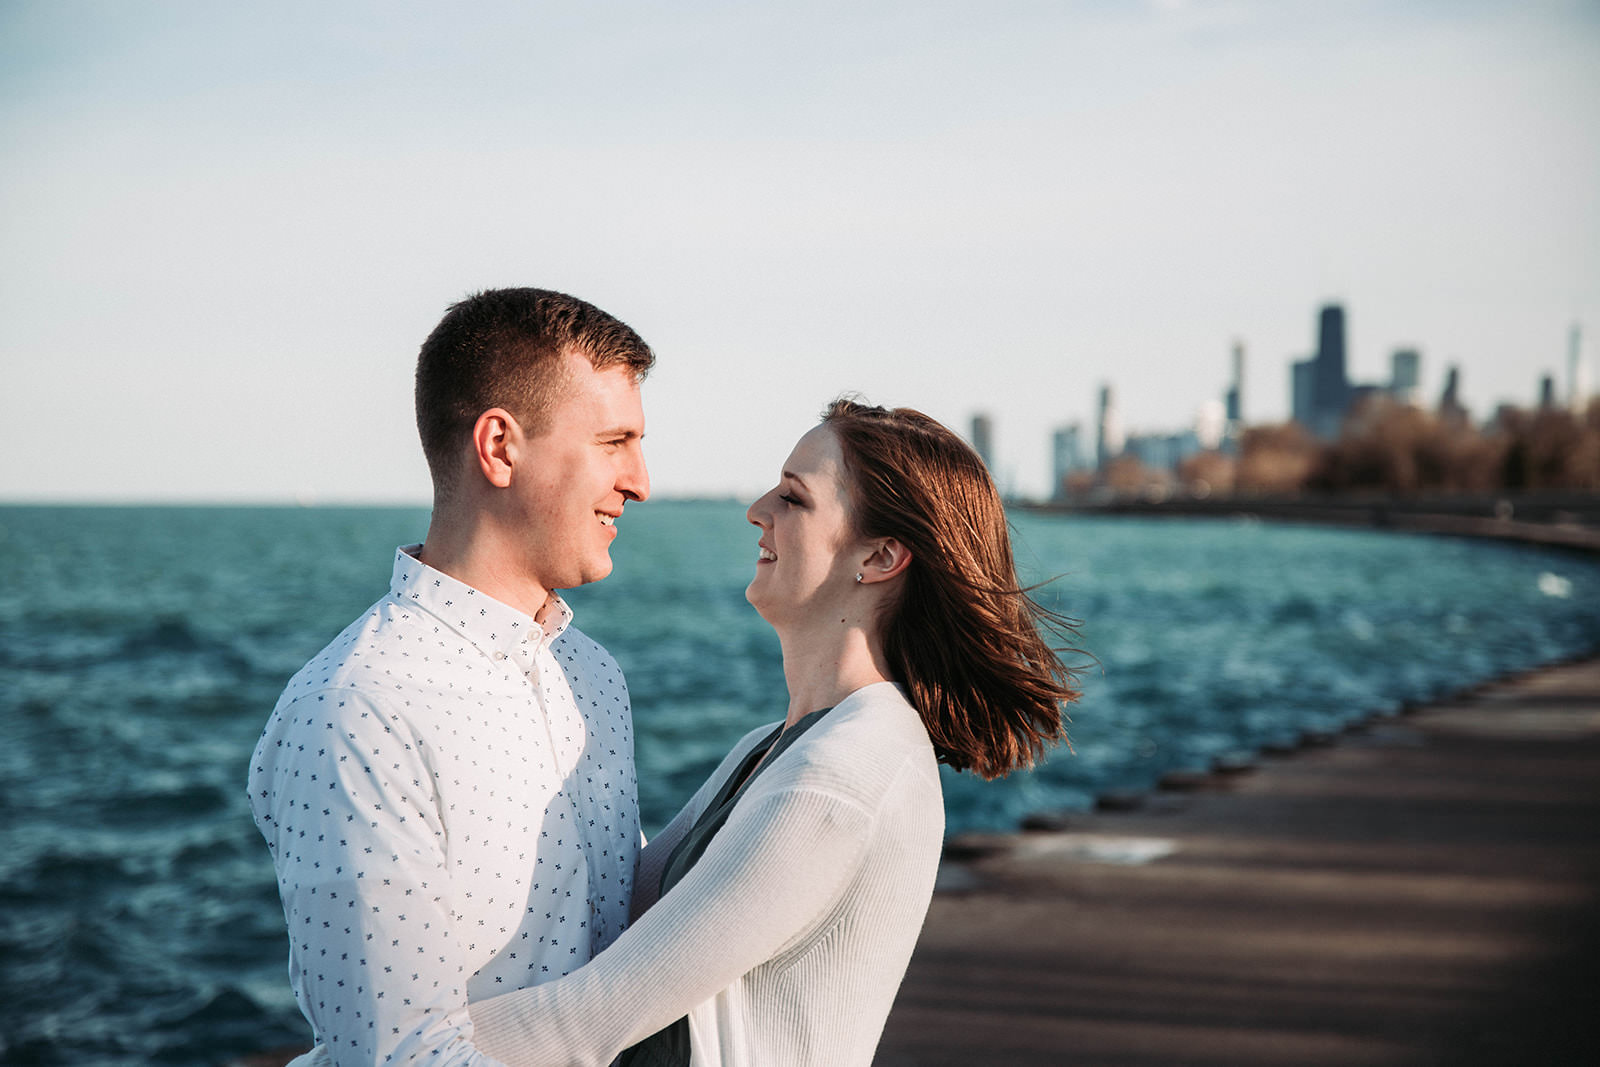 Downtown_chicago_spring_engagement_session-15.jpg